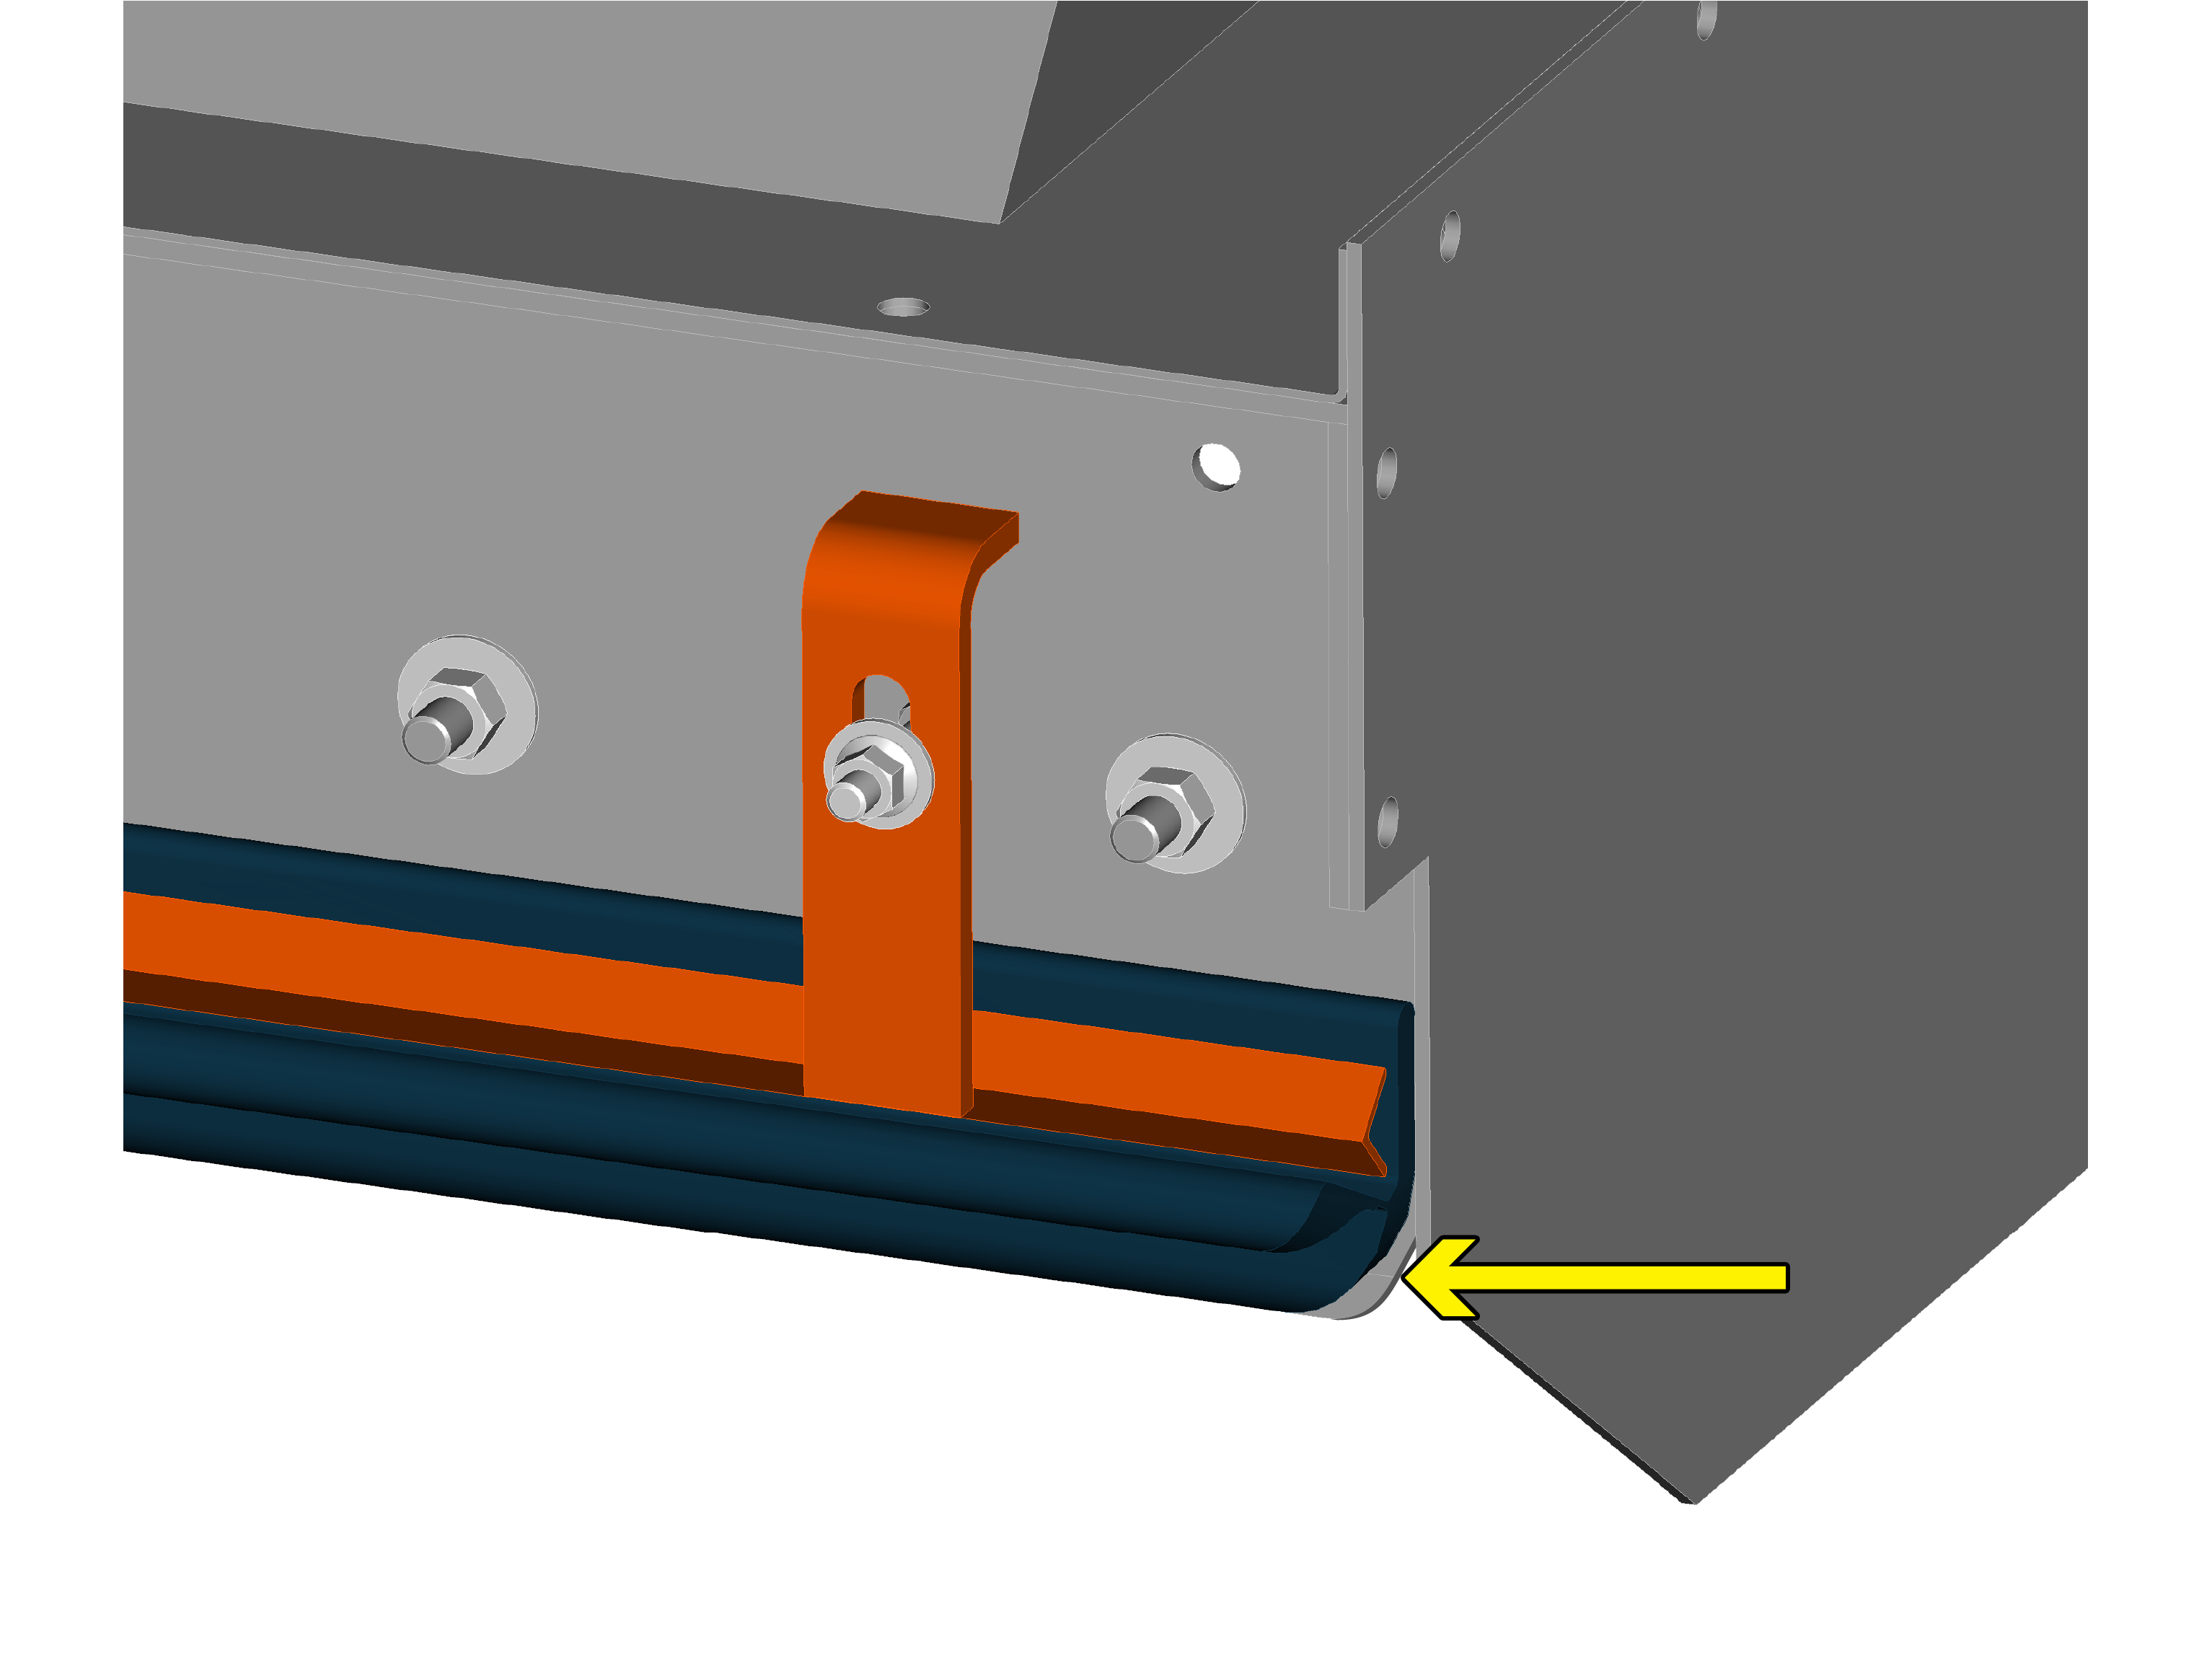 Round off the seal’s leading edge at the tail end of the conveyor where the belt enters the back of the loading zone